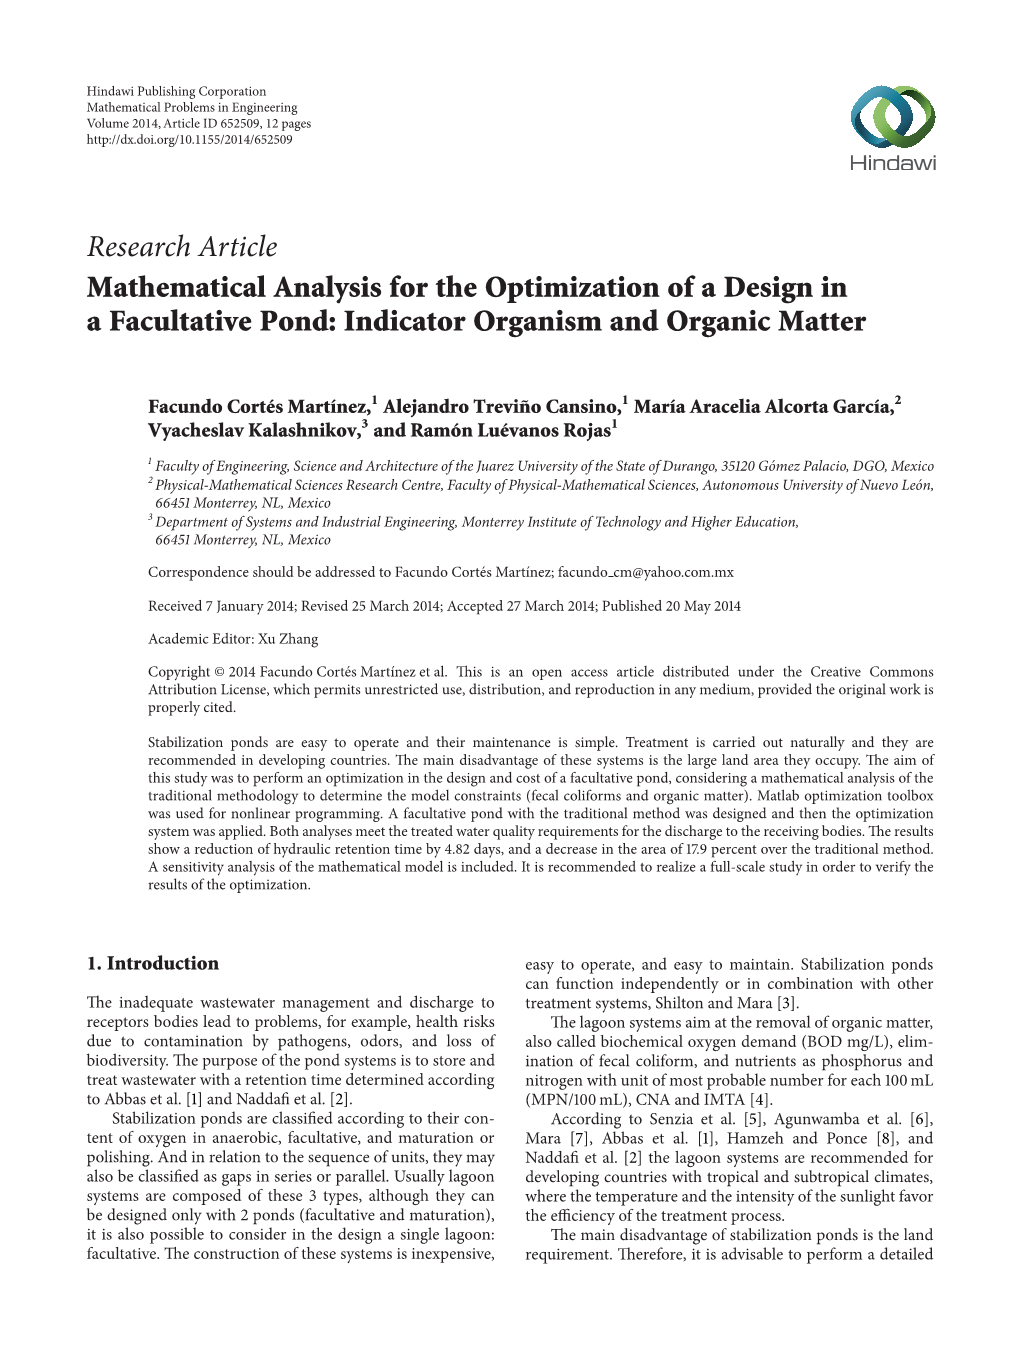 Mathematical Analysis for the Optimization of a Design in a Facultative Pond: Indicator Organism and Organic Matter